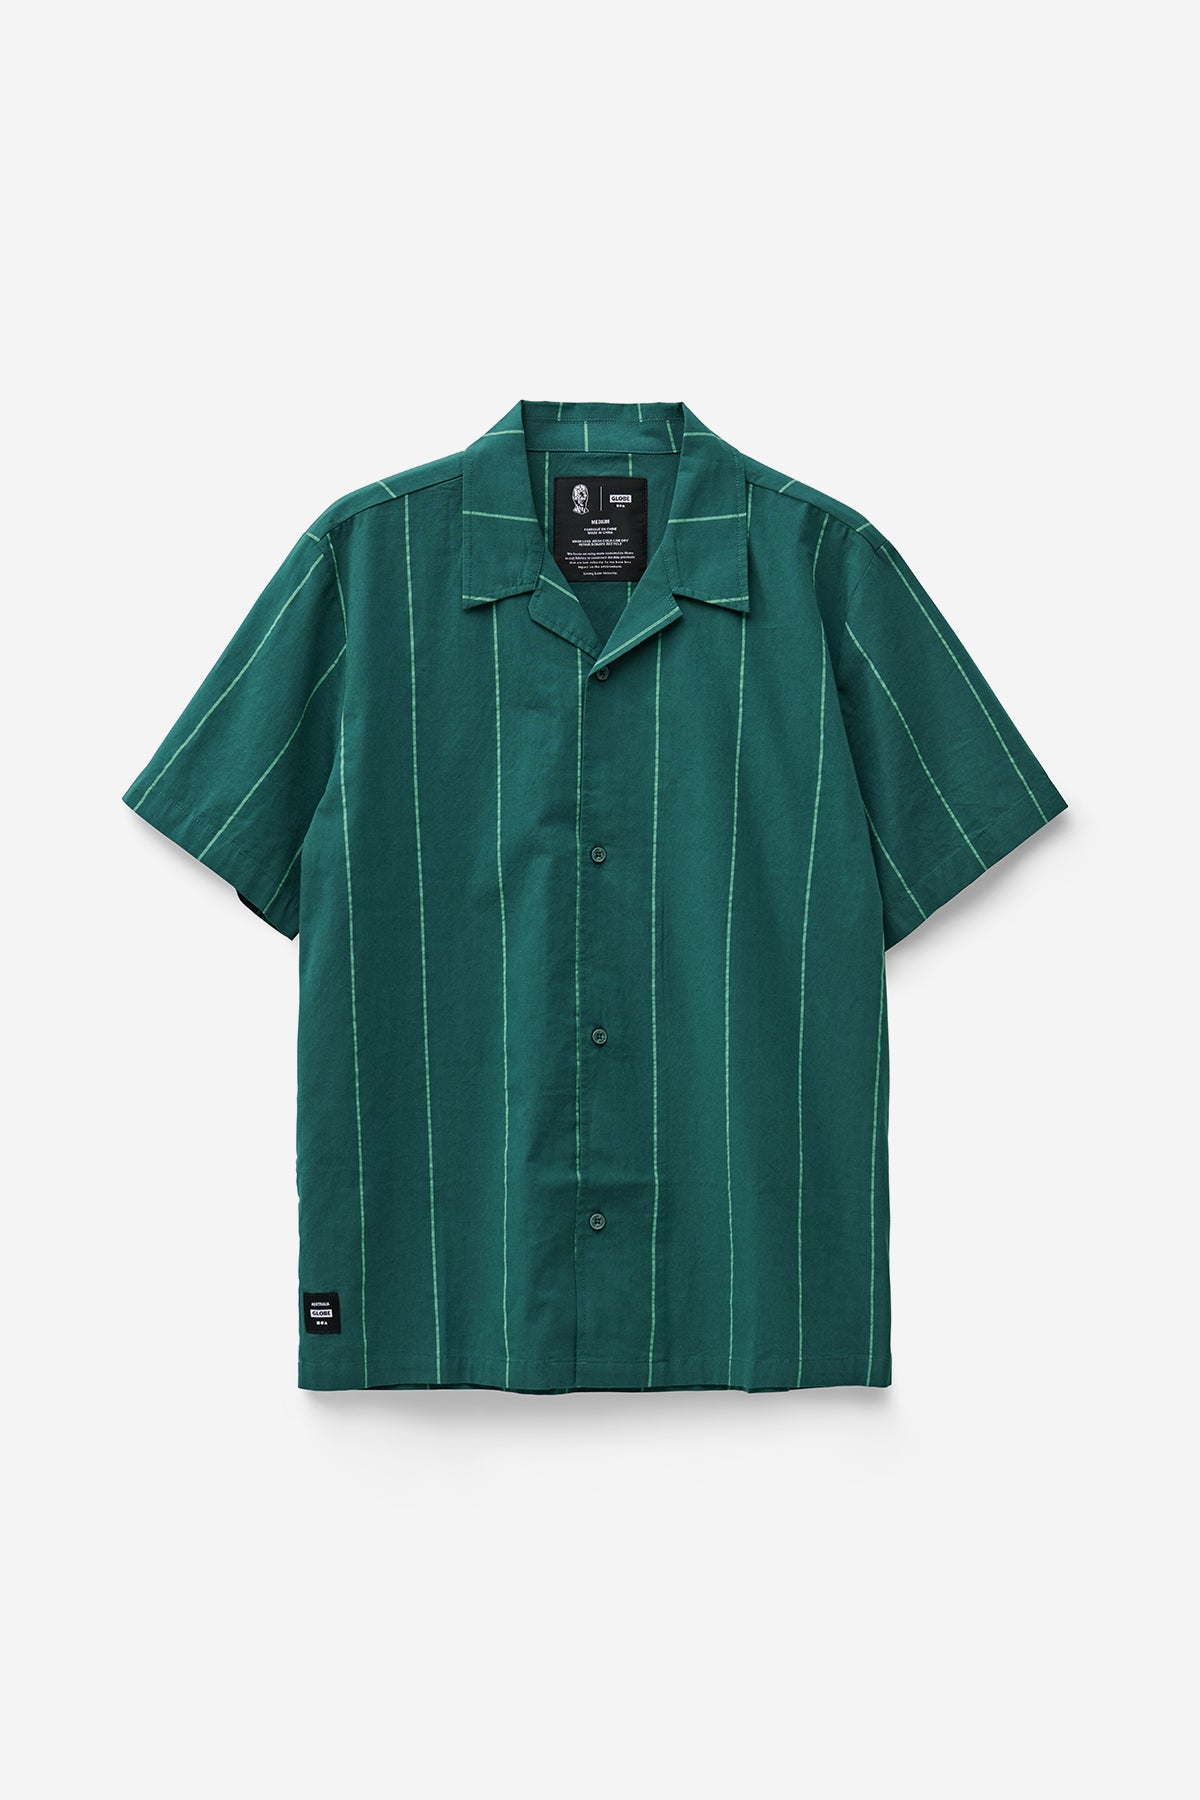 off body front view of Off Course S/S Shirt - Night Green